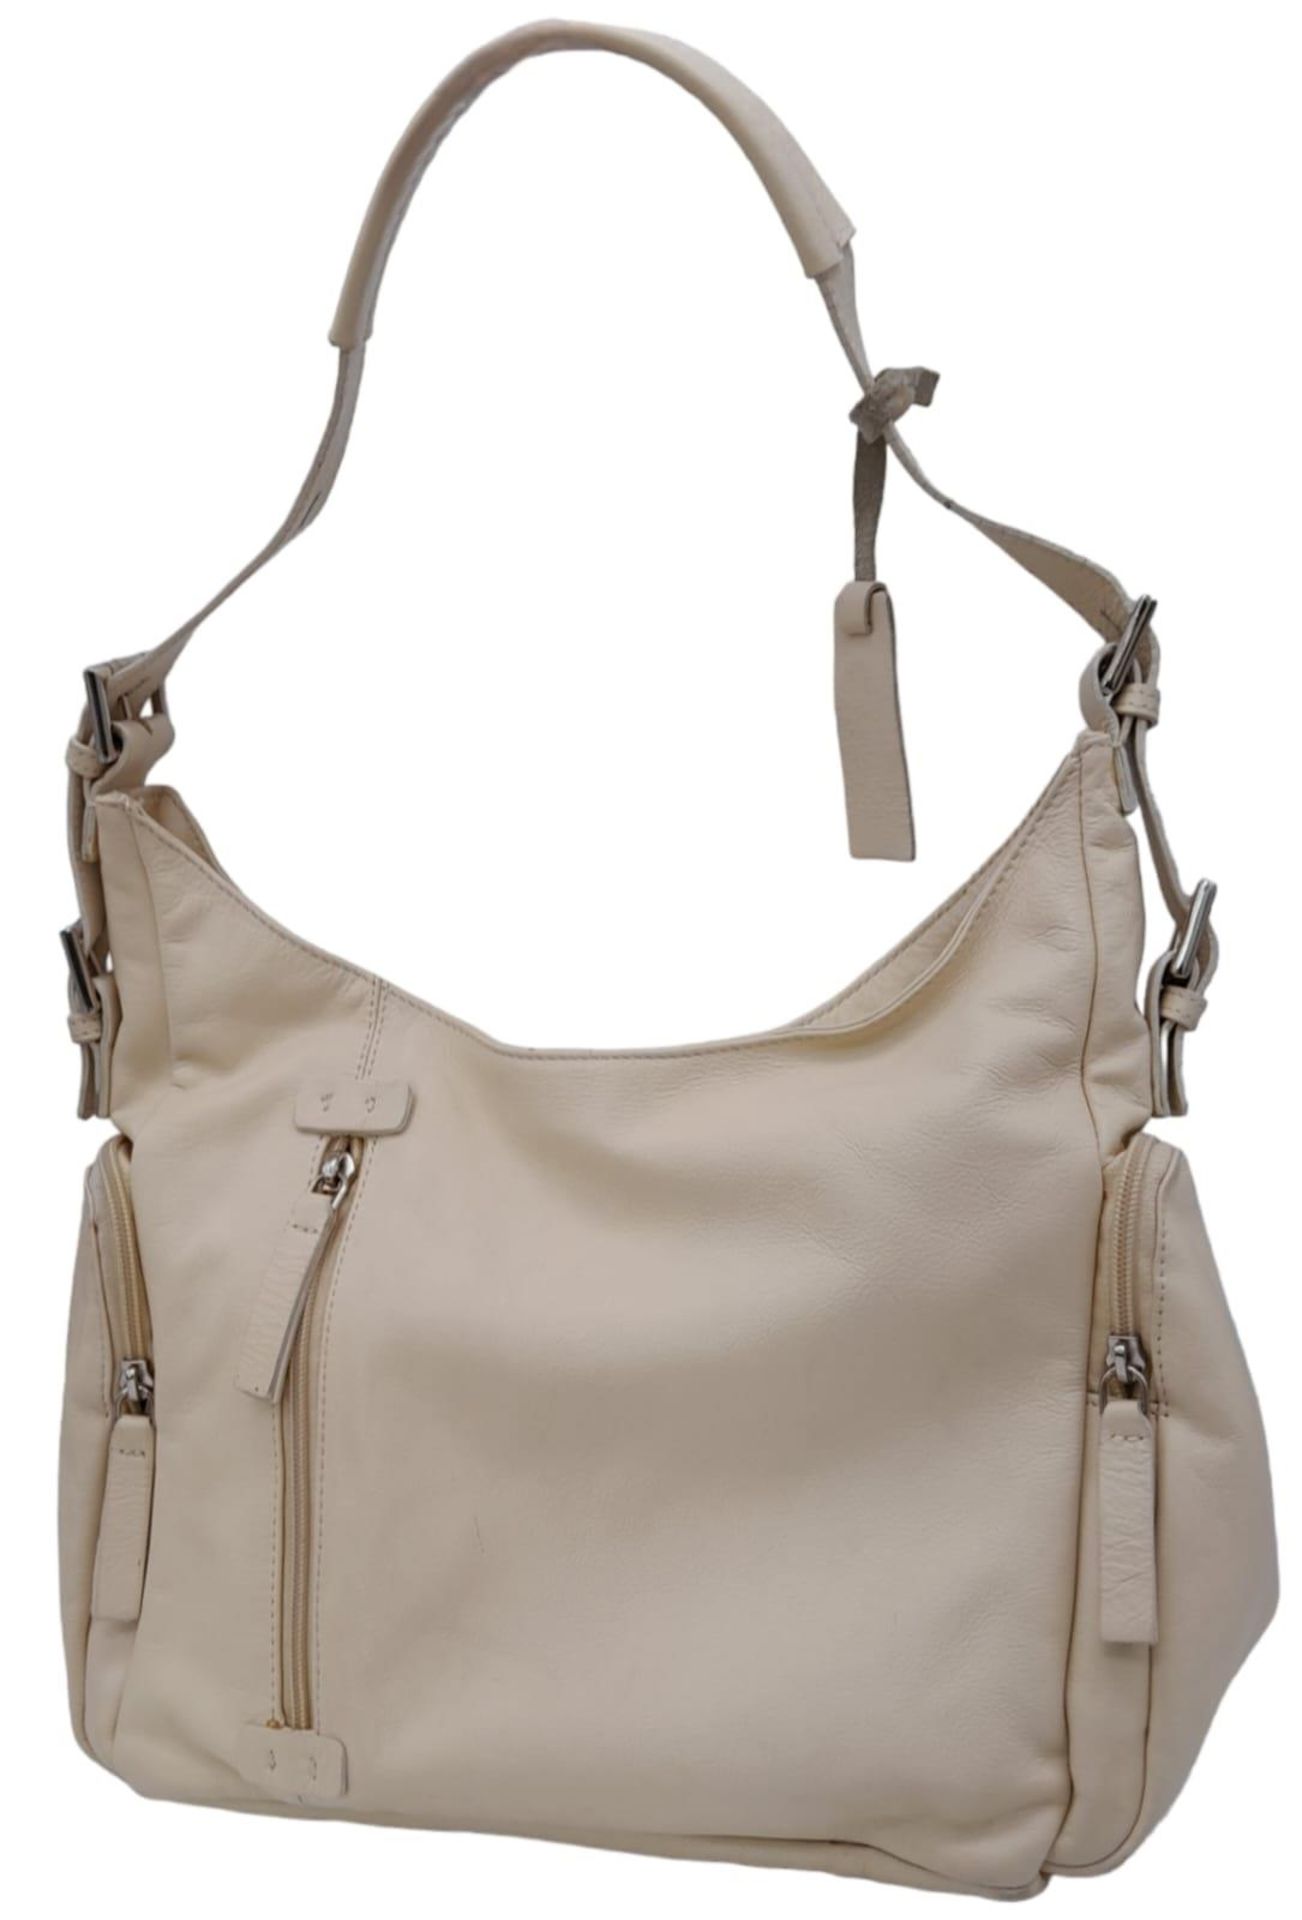 An Azure Beige Leather Handbag. Beige leather exterior with three zipped compartments. Purple